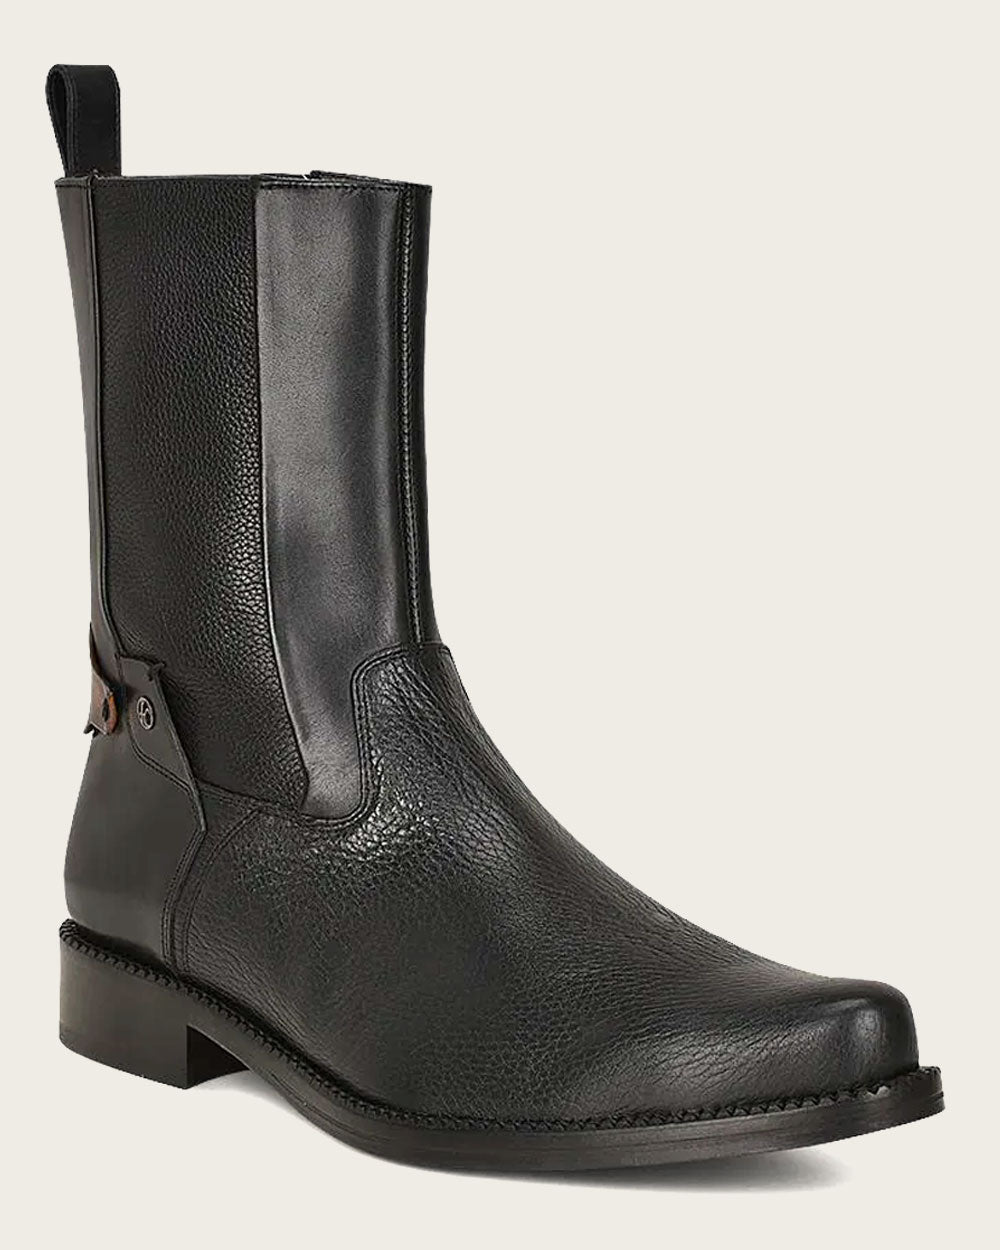 Cuadra Black Boots: A statement piece for elegant occasions.